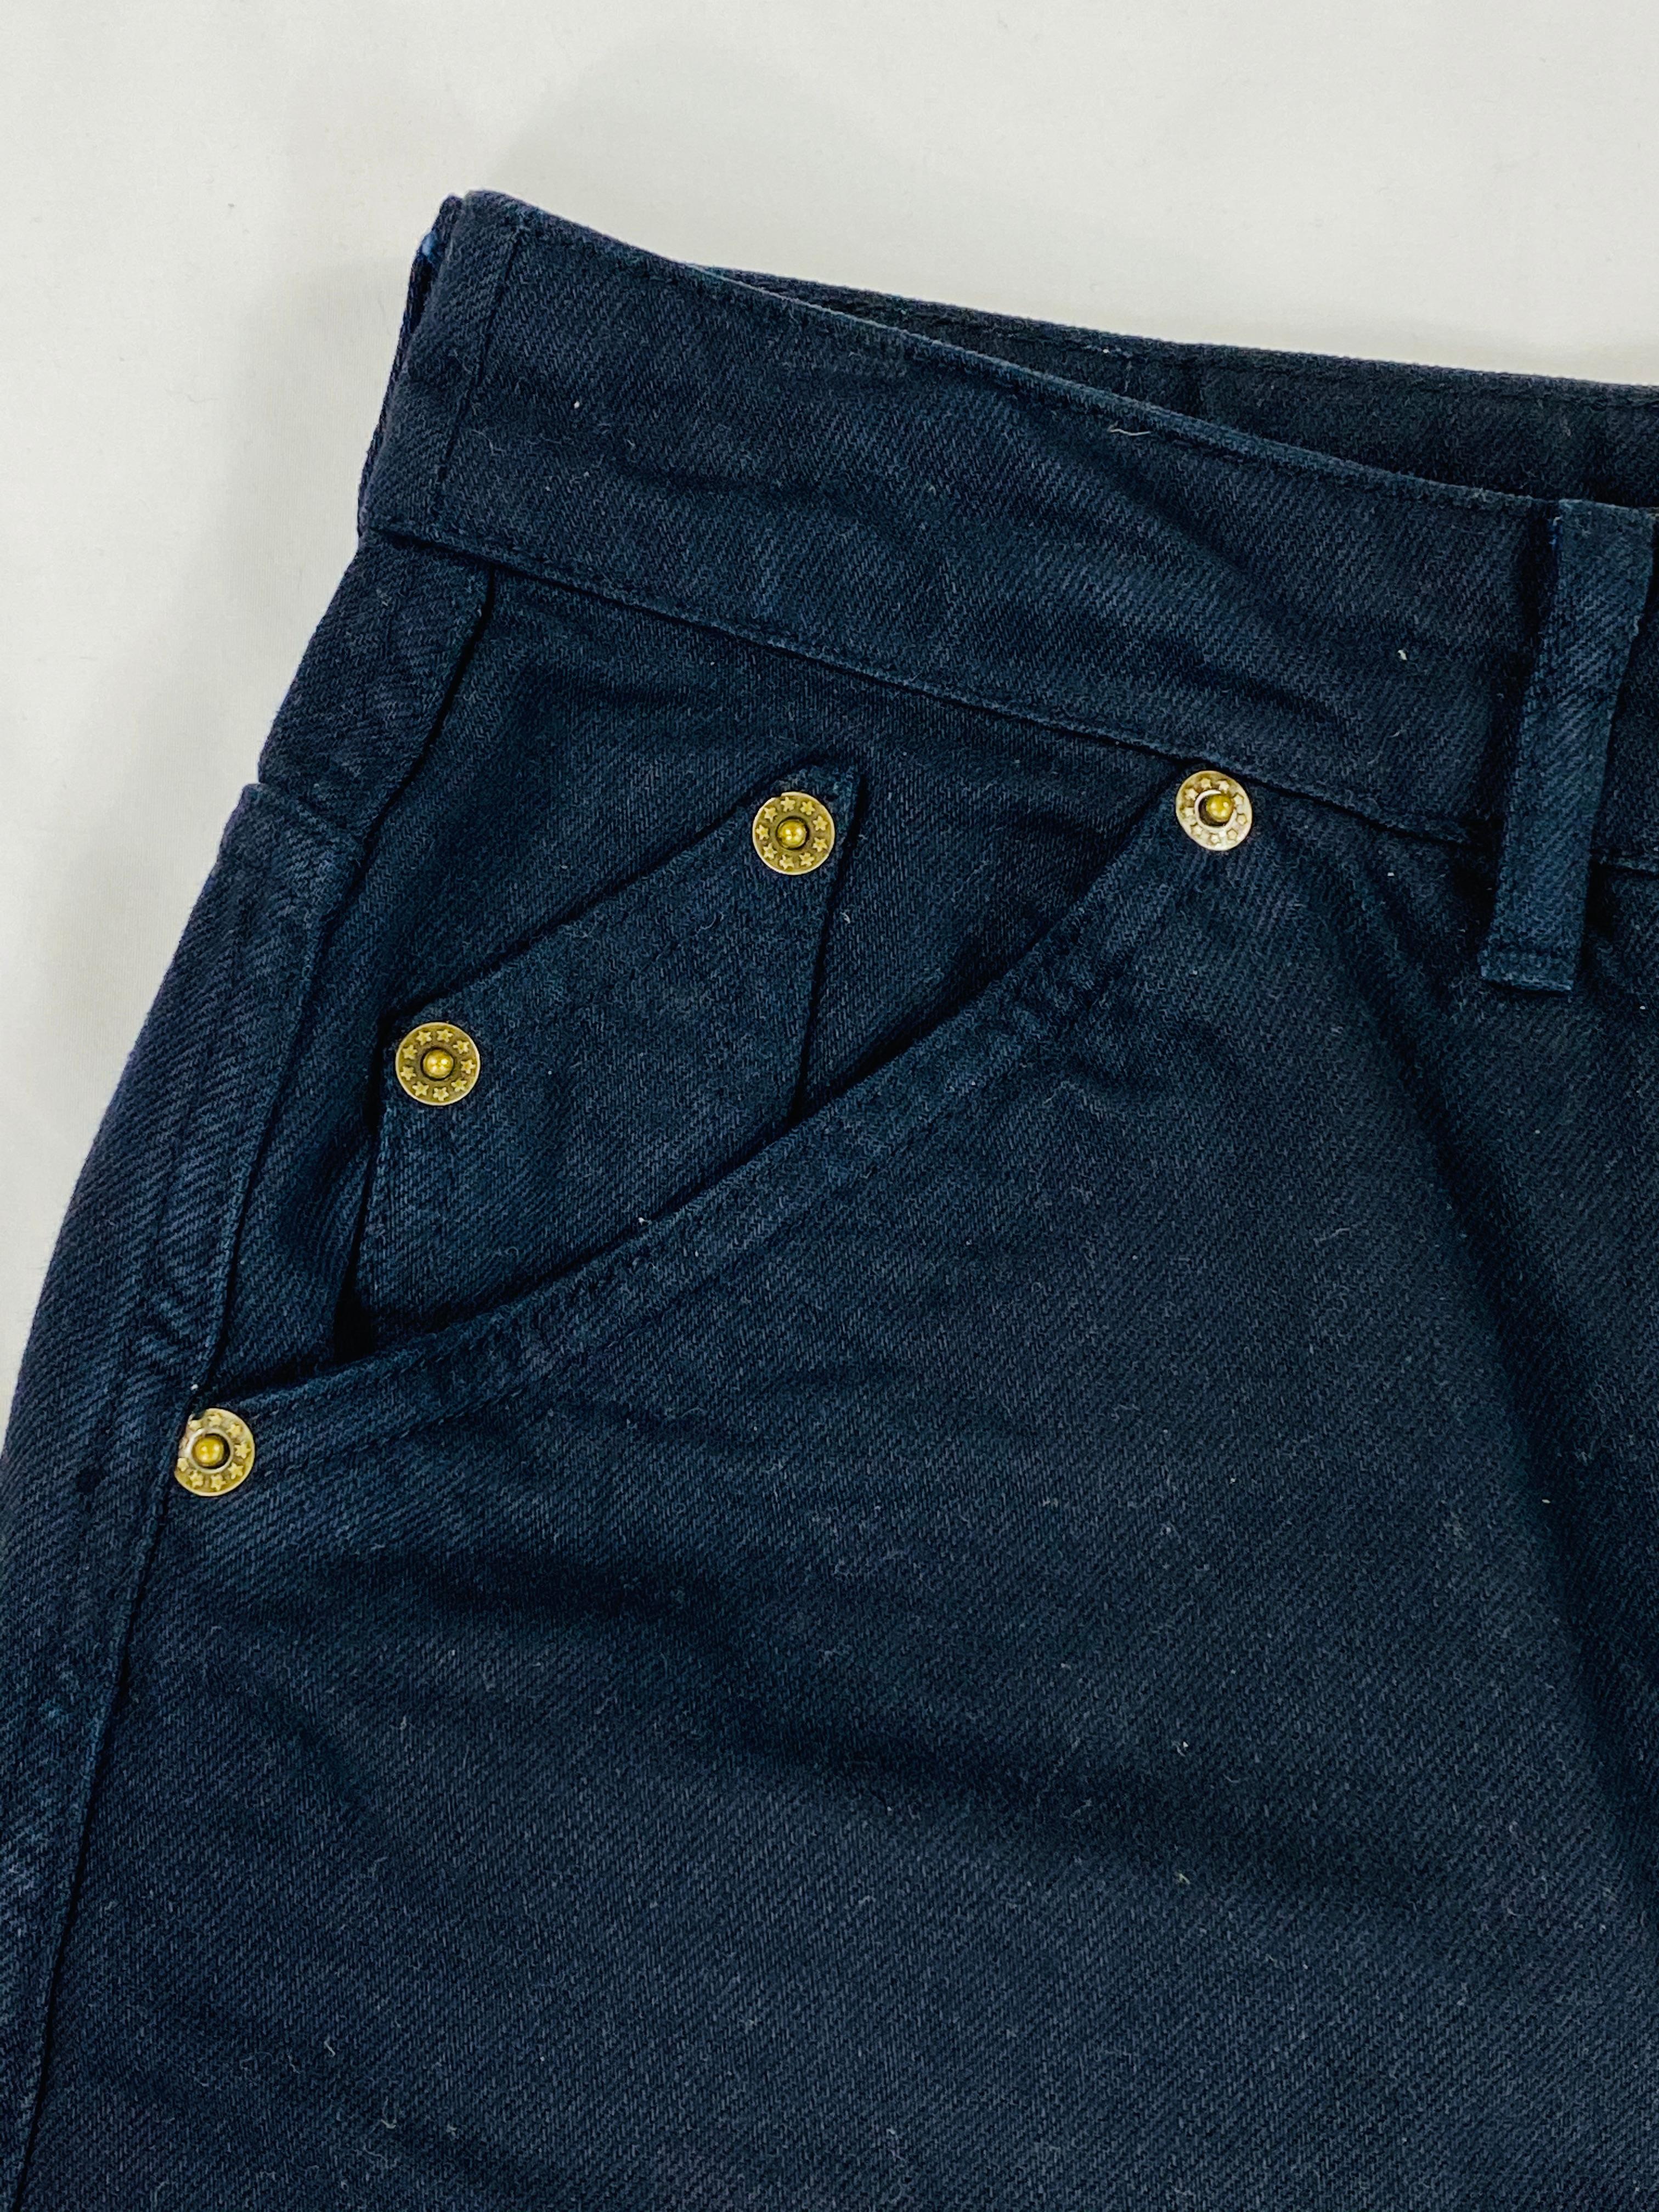 Product details:

Featuring dark blue/ navy color, high waisted and wide leg style, calf length denim pants. 
